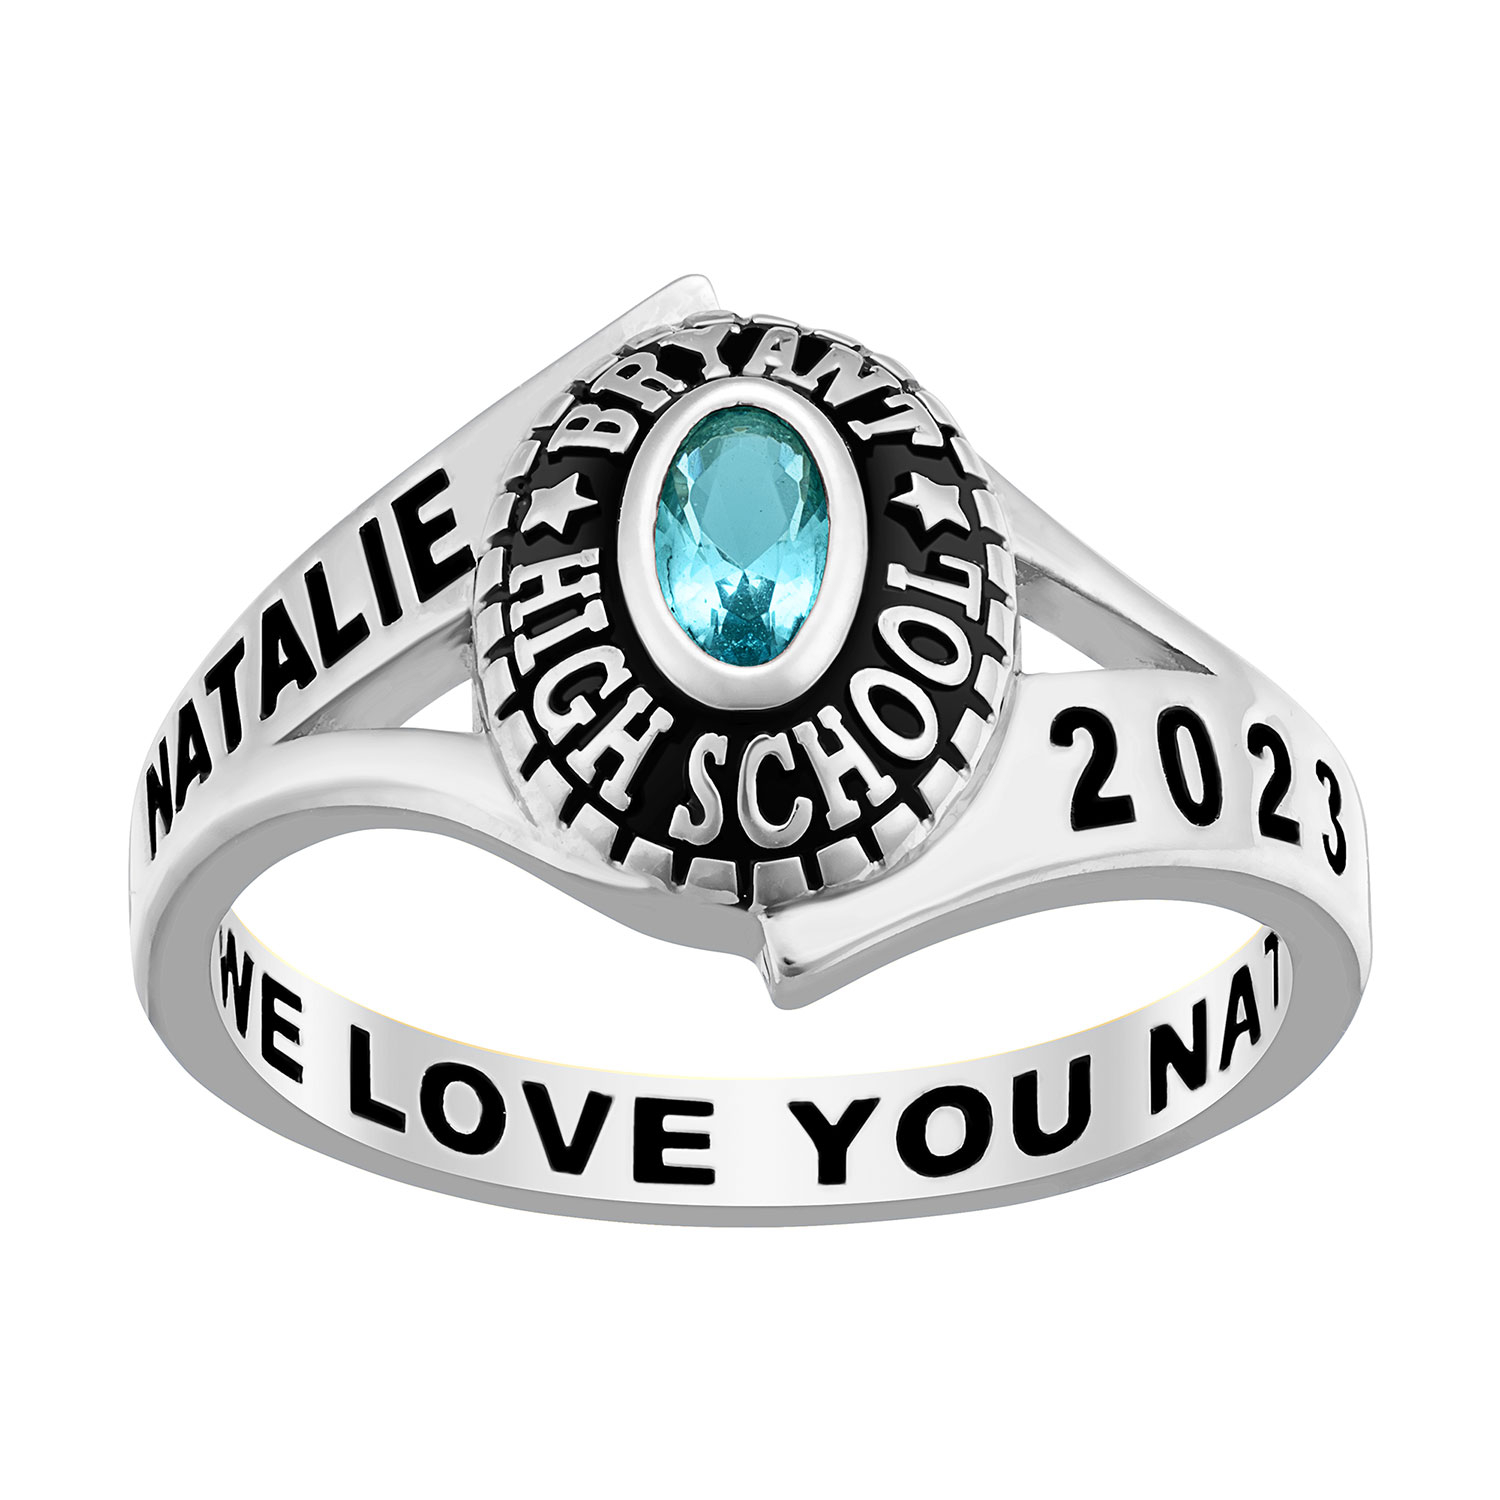 Ladies' Platinum over Sterling Silver Birthstone Traditional Class Ring